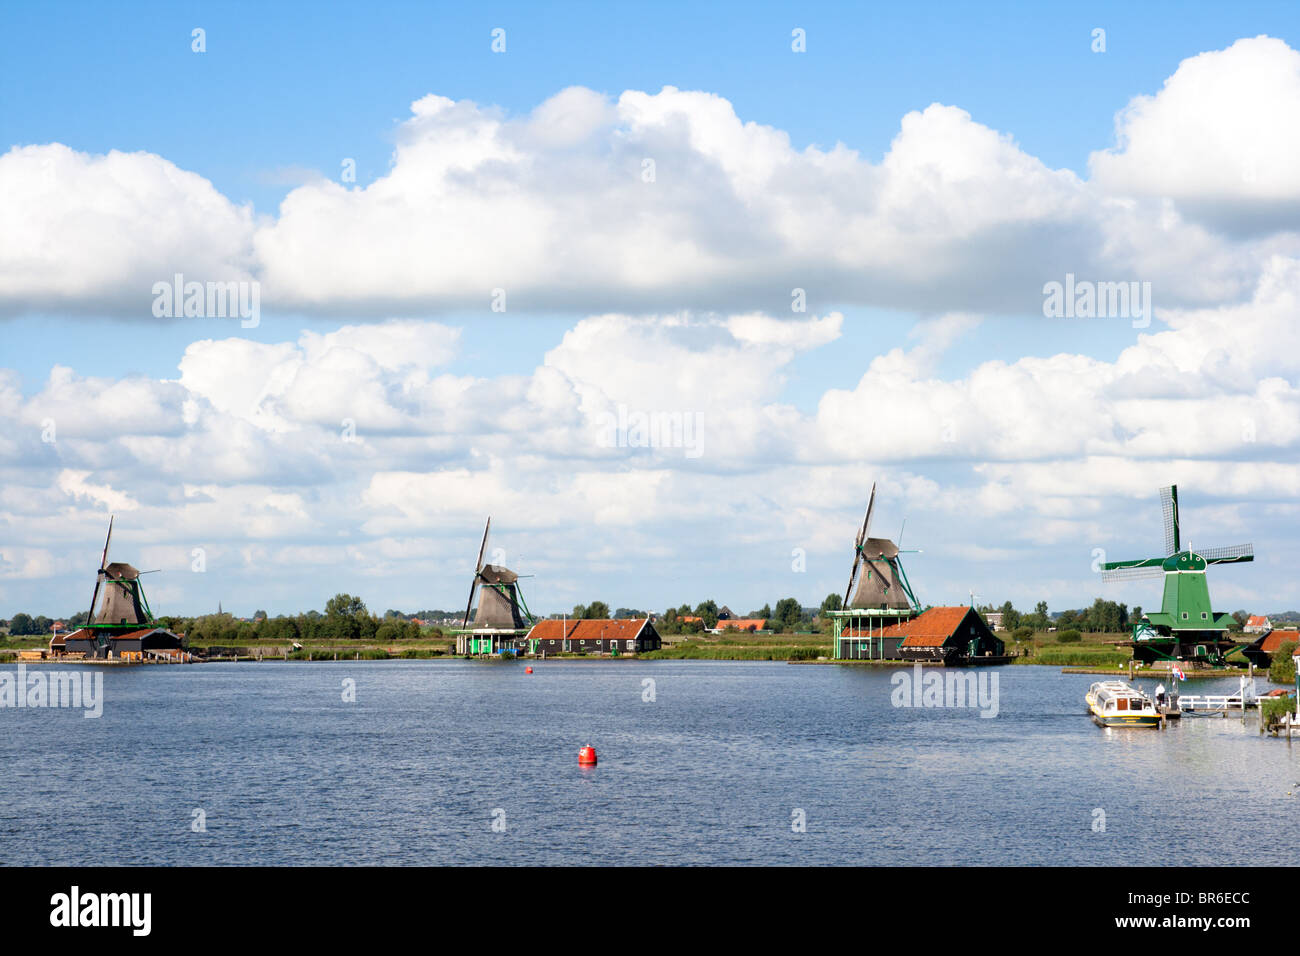 Well-preserved historic windmills and houses at the Zaanse Schans in Holland Stock Photo